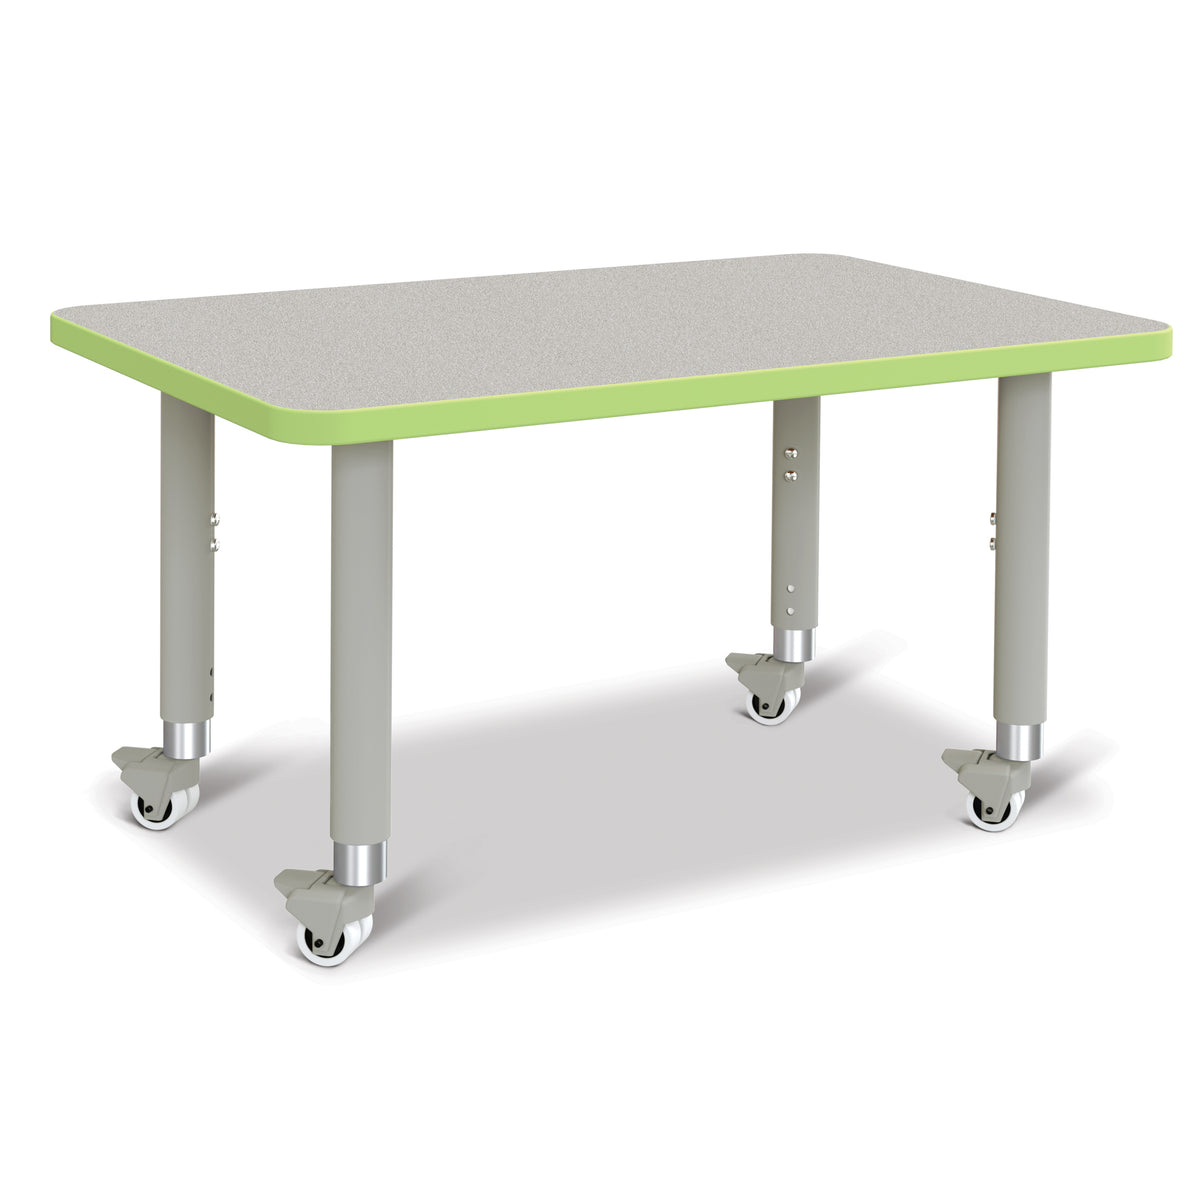 6478JCM130, Berries Rectangle Activity Table - 24" X 36", Mobile - Freckled Gray/Key Lime/Gray